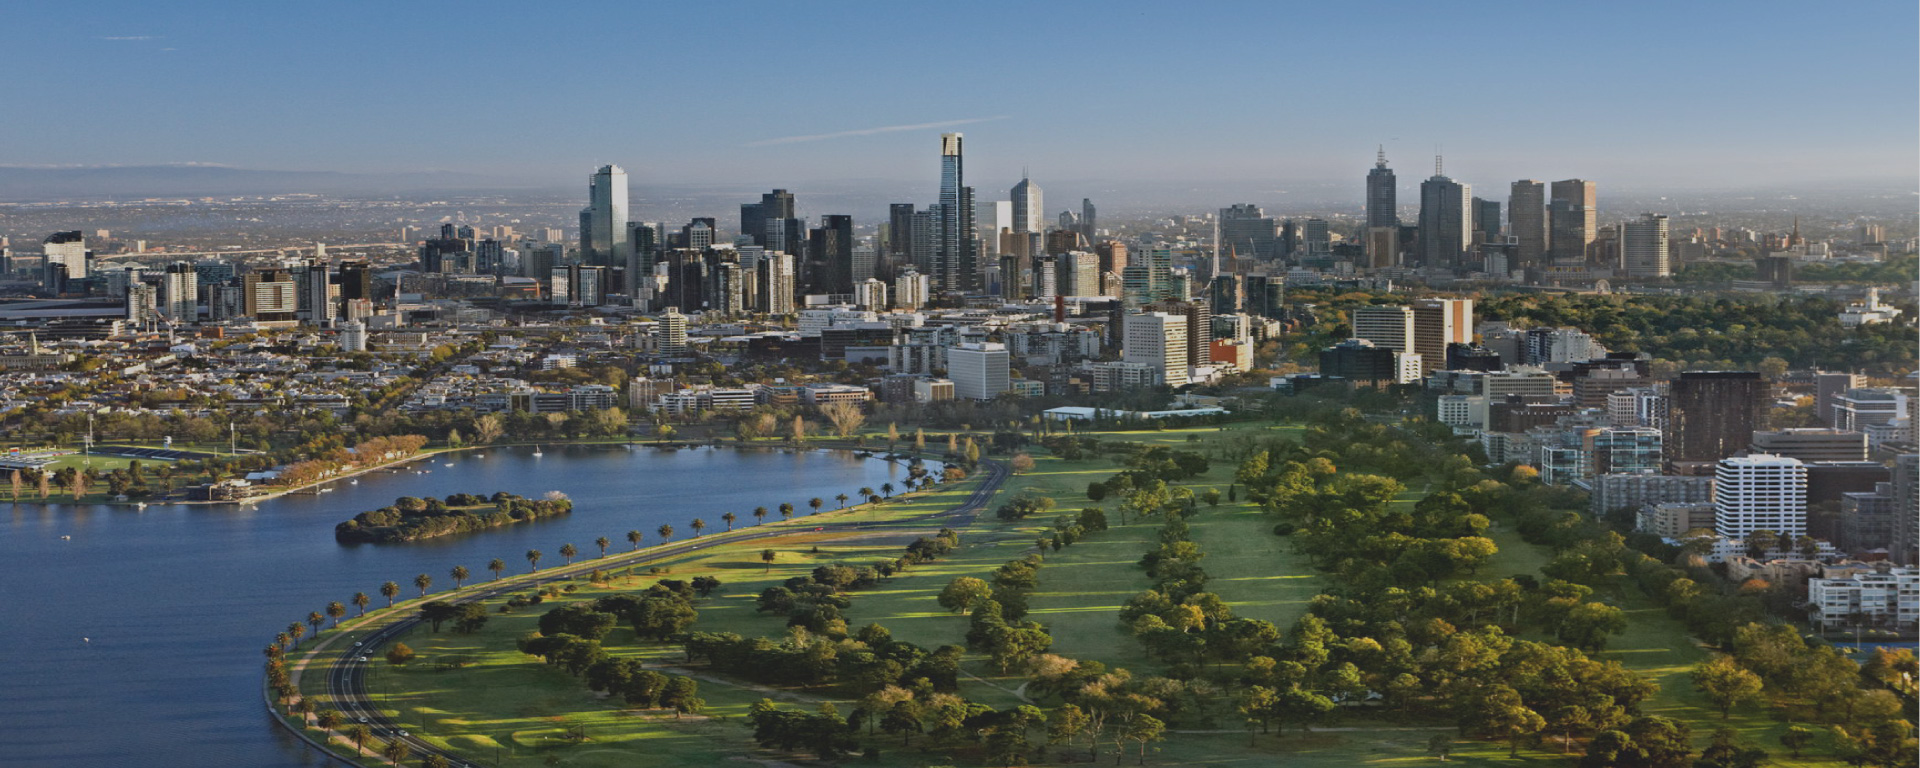 Are you considering a property development in Melbourne? Contact us today!